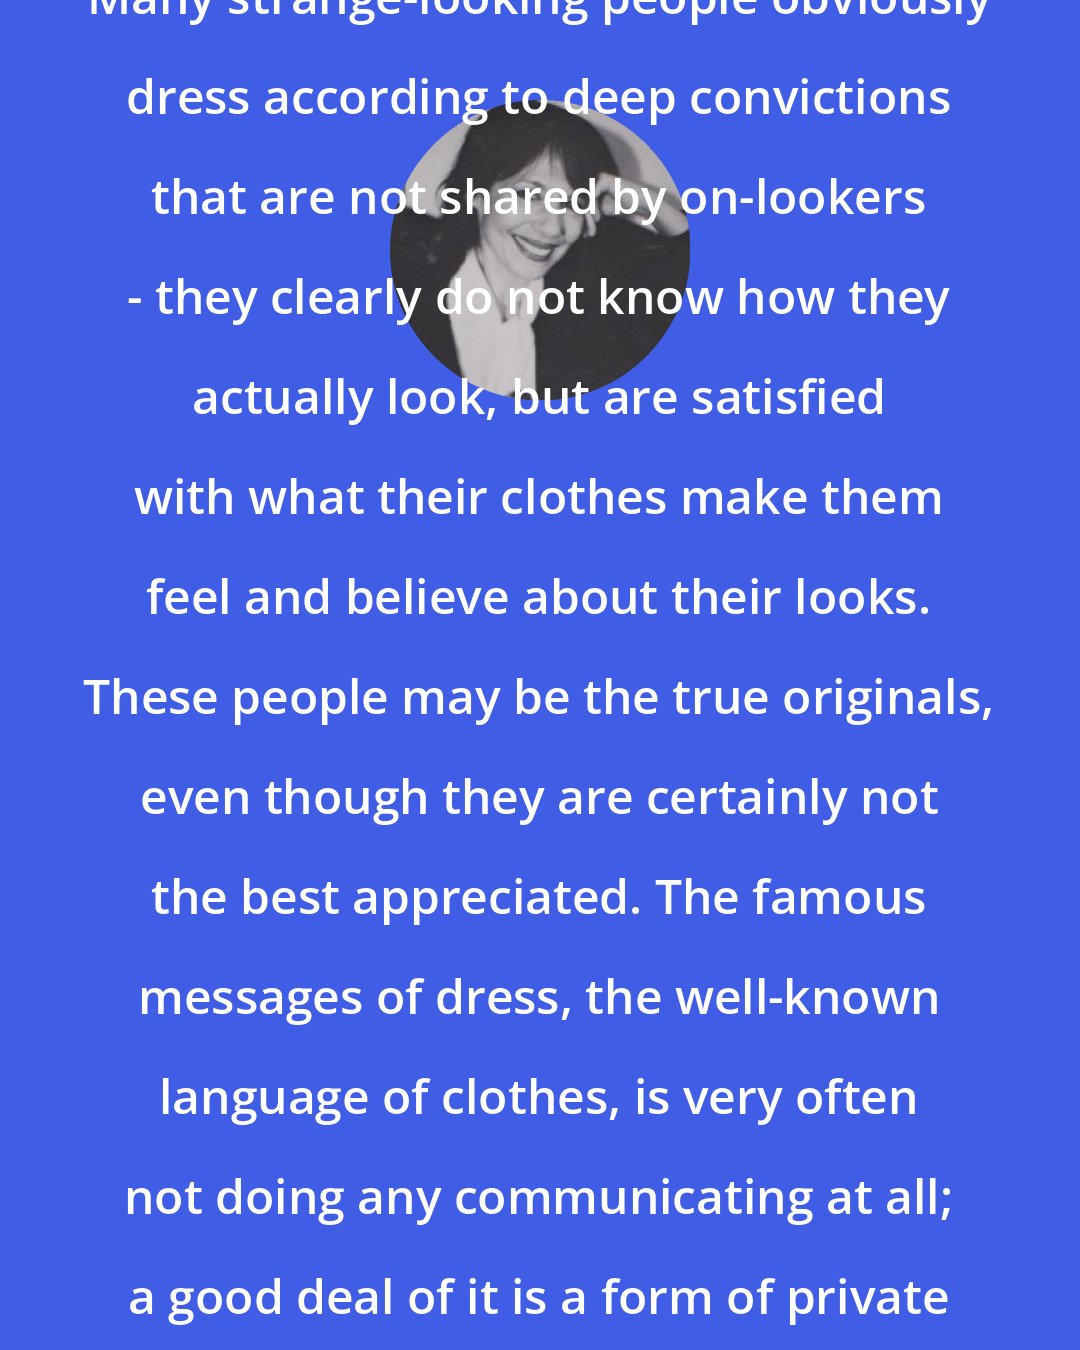 Anne Hollander: Many strange-looking people obviously dress according to deep convictions that are not shared by on-lookers - they clearly do not know how they actually look, but are satisfied with what their clothes make them feel and believe about their looks. These people may be the true originals, even though they are certainly not the best appreciated. The famous messages of dress, the well-known language of clothes, is very often not doing any communicating at all; a good deal of it is a form of private muttering.